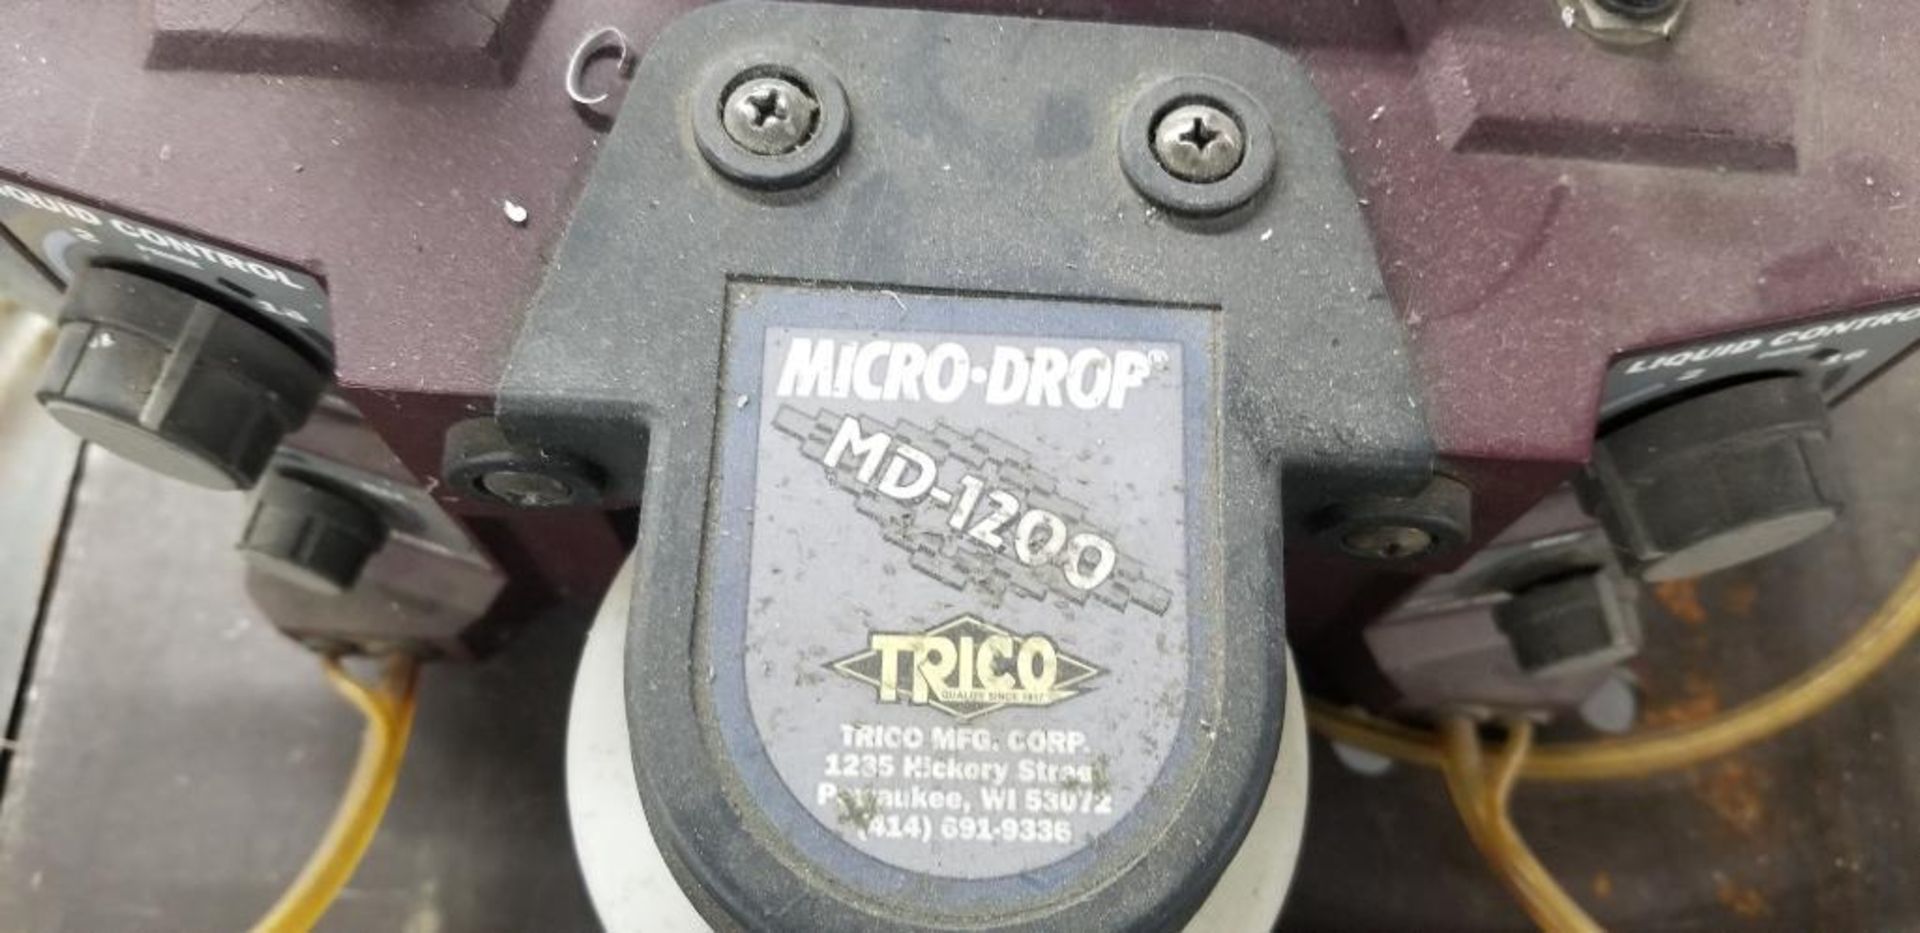 Trico Micro-Drop MD-1200 - Image 3 of 3